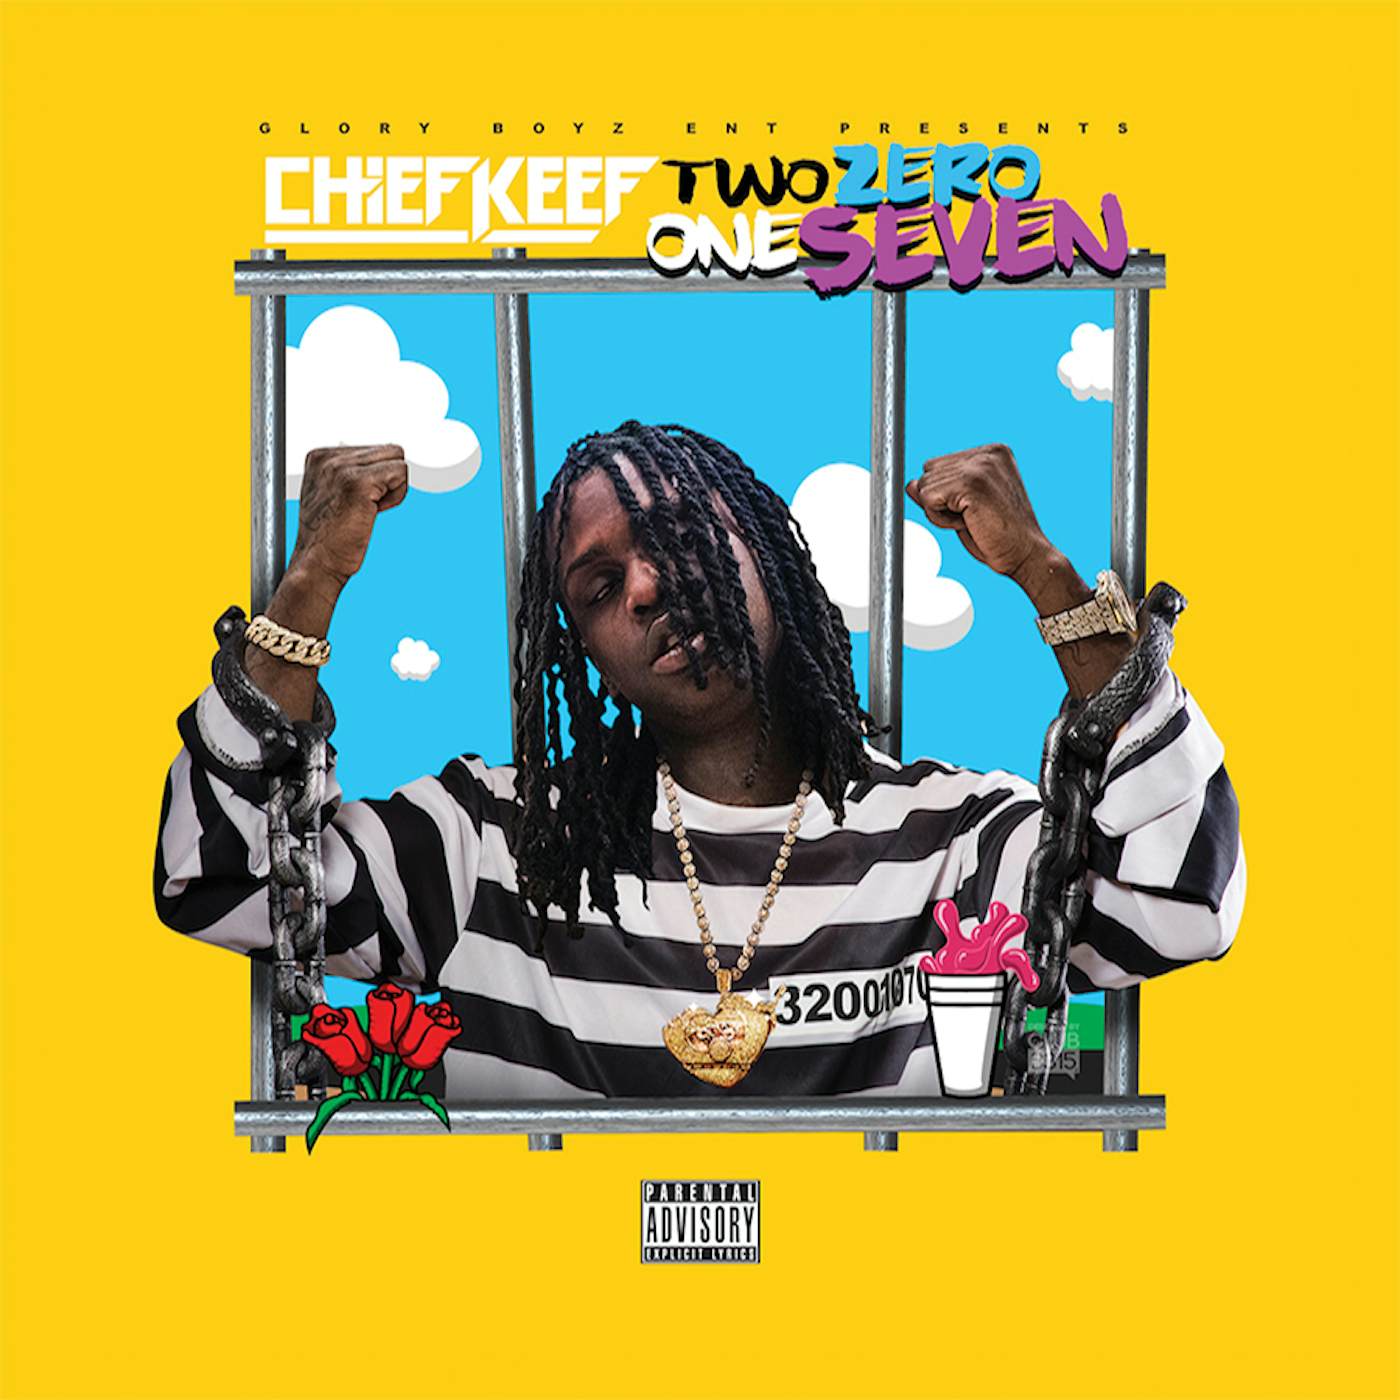 Chief Keef TWO ZERO ONE SEVEN CD